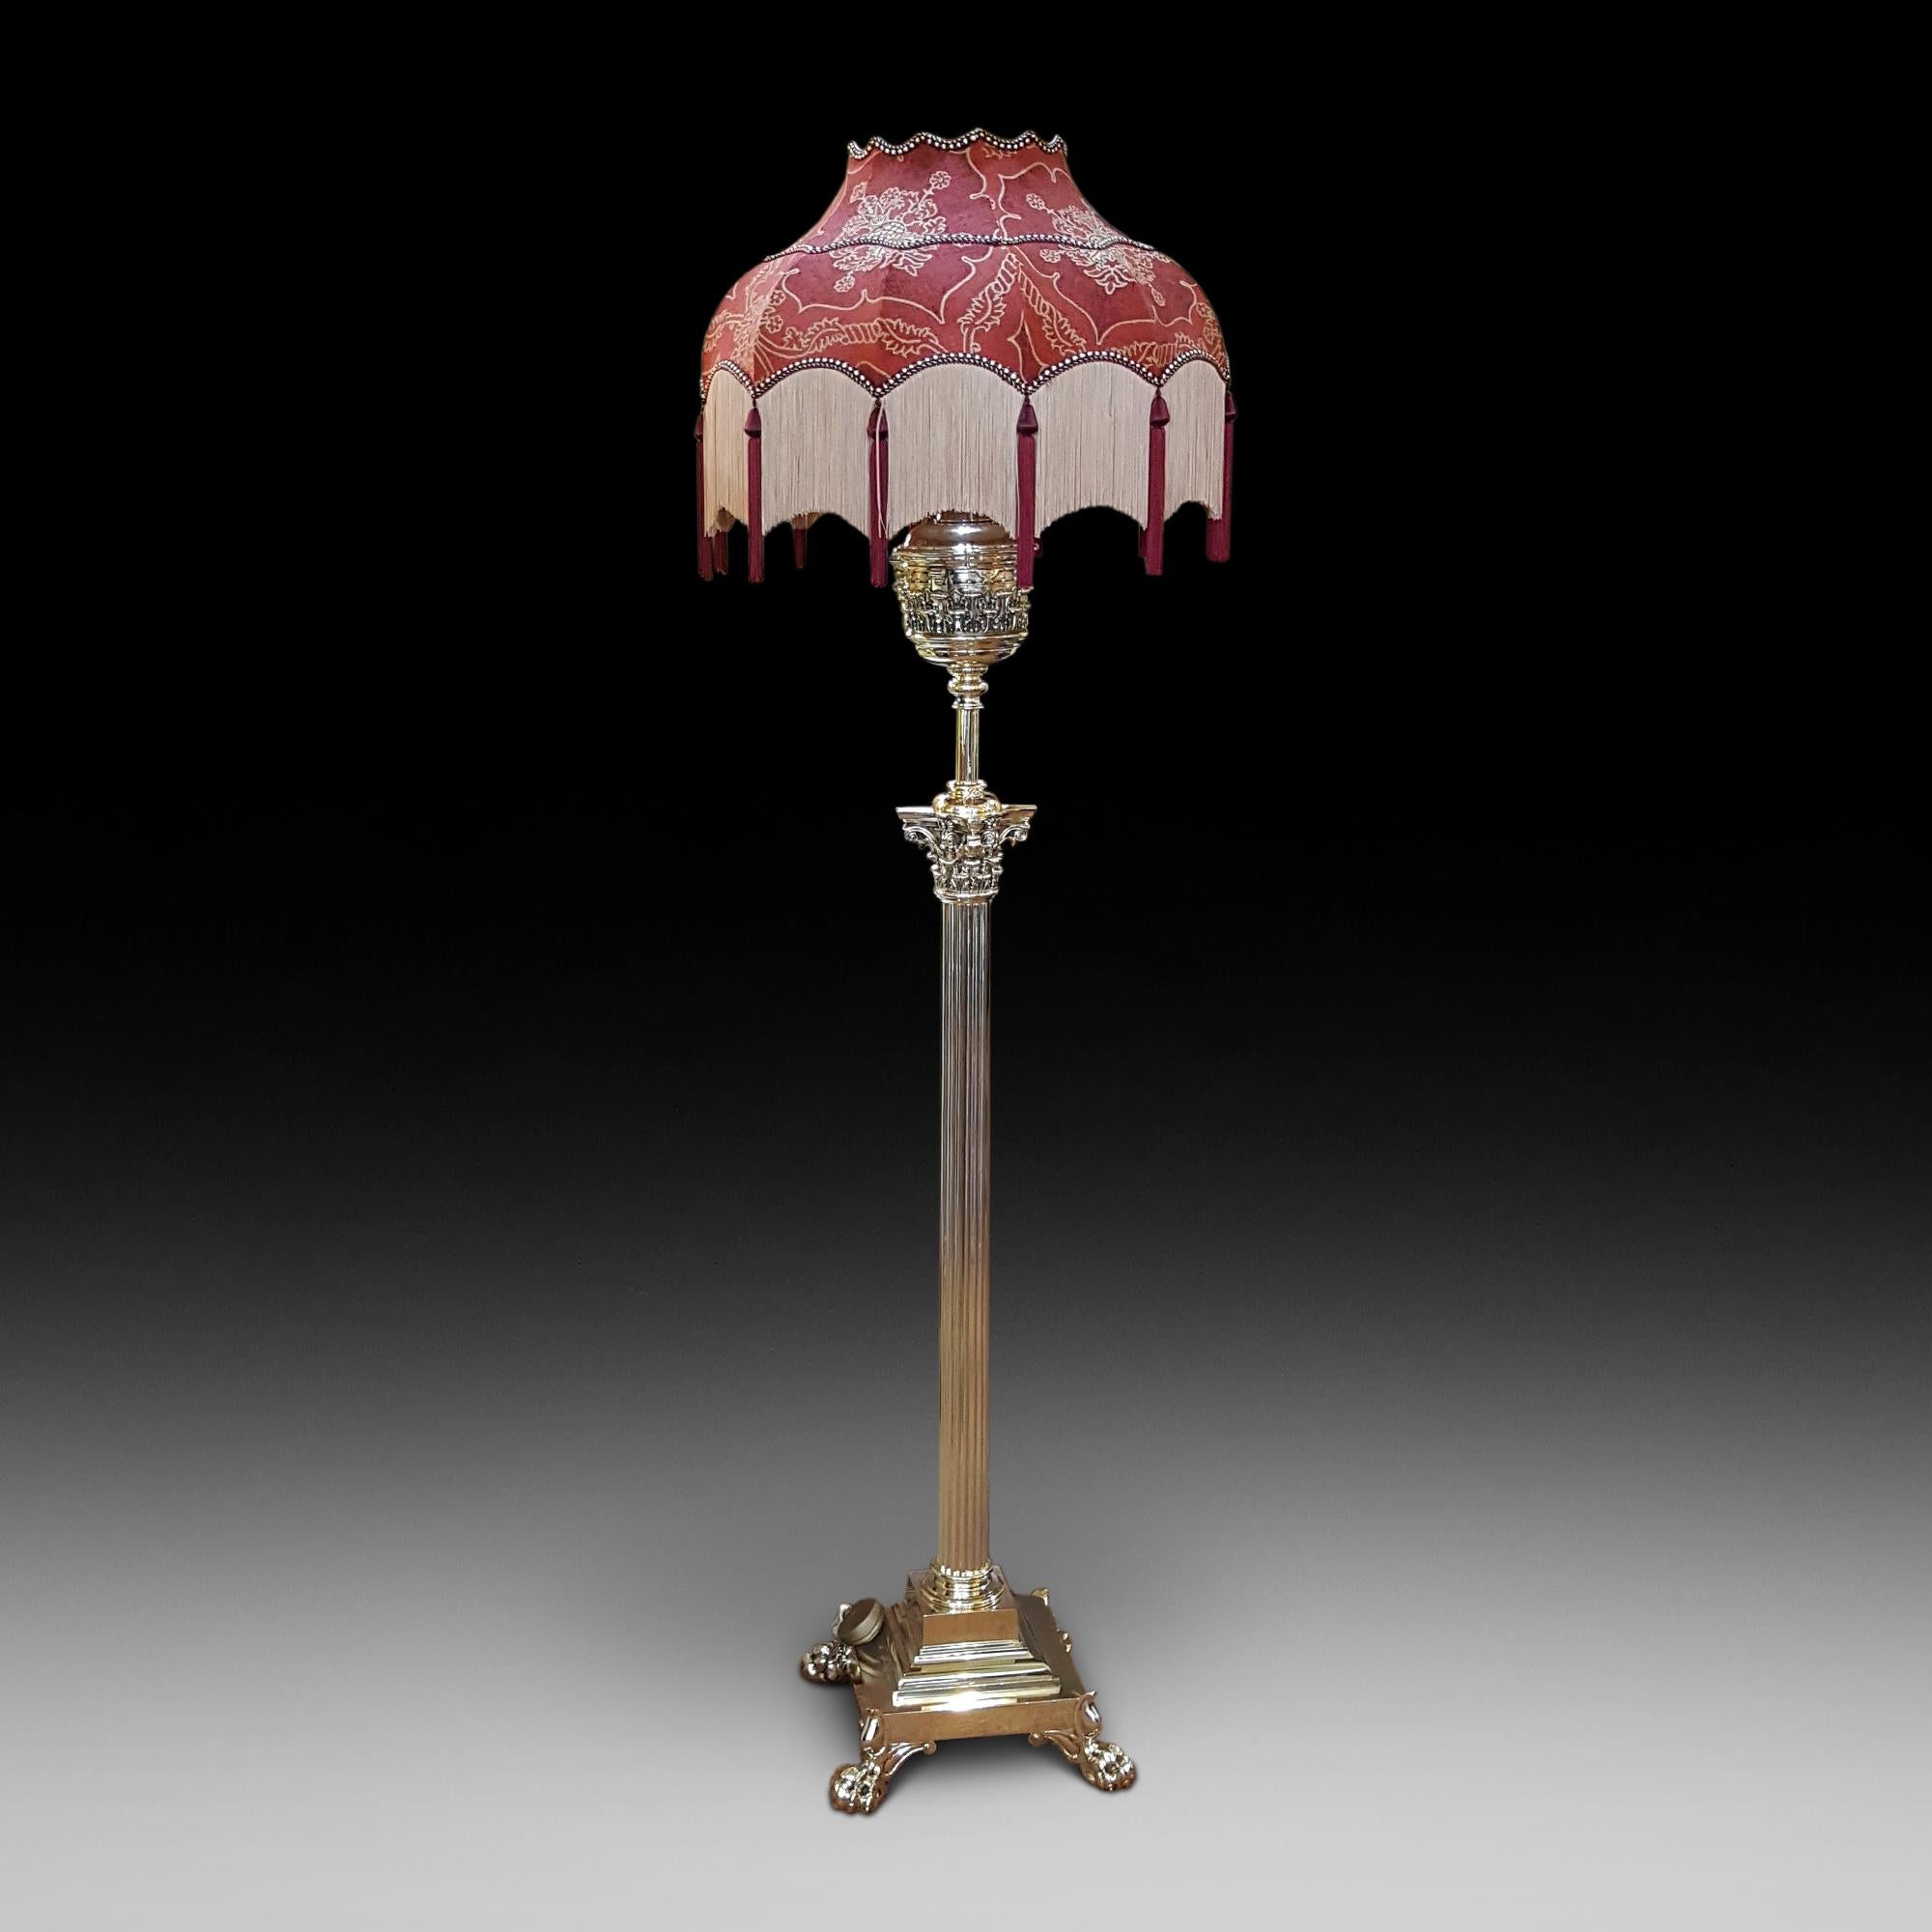 Victorian brass extending telescopic standard oil lamp by messenger with substantial corinthian column, stepped platform base on lion paw feet - converted to electric.
The lampshade(s) are newly handmade silks by the same maker as provides the